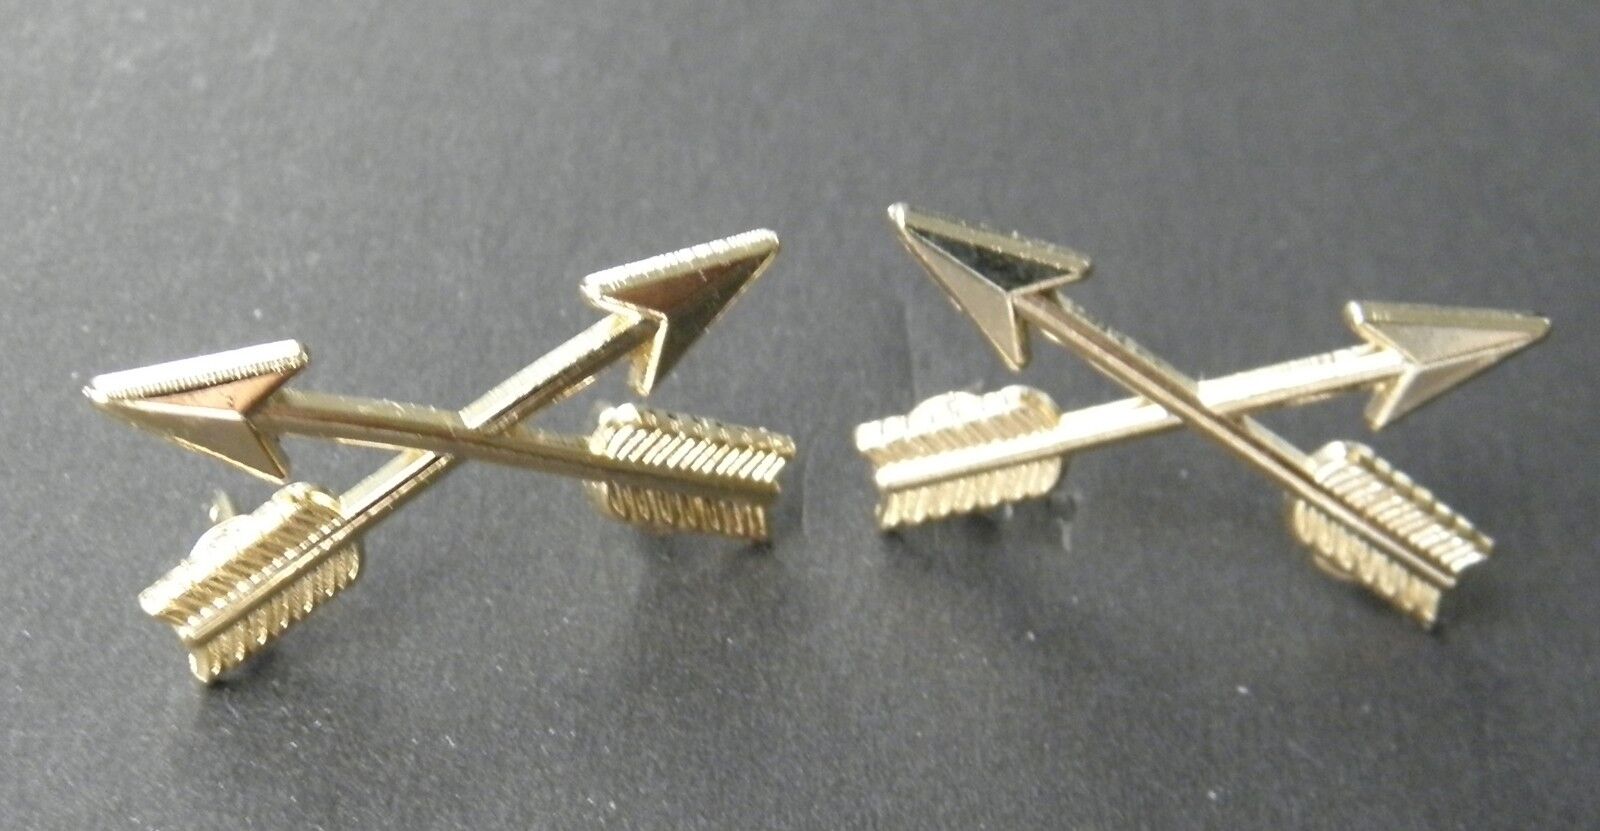 Special Forces Arrows Insignia Collar Lapel Pin Set of two (2) Pins 1 inch